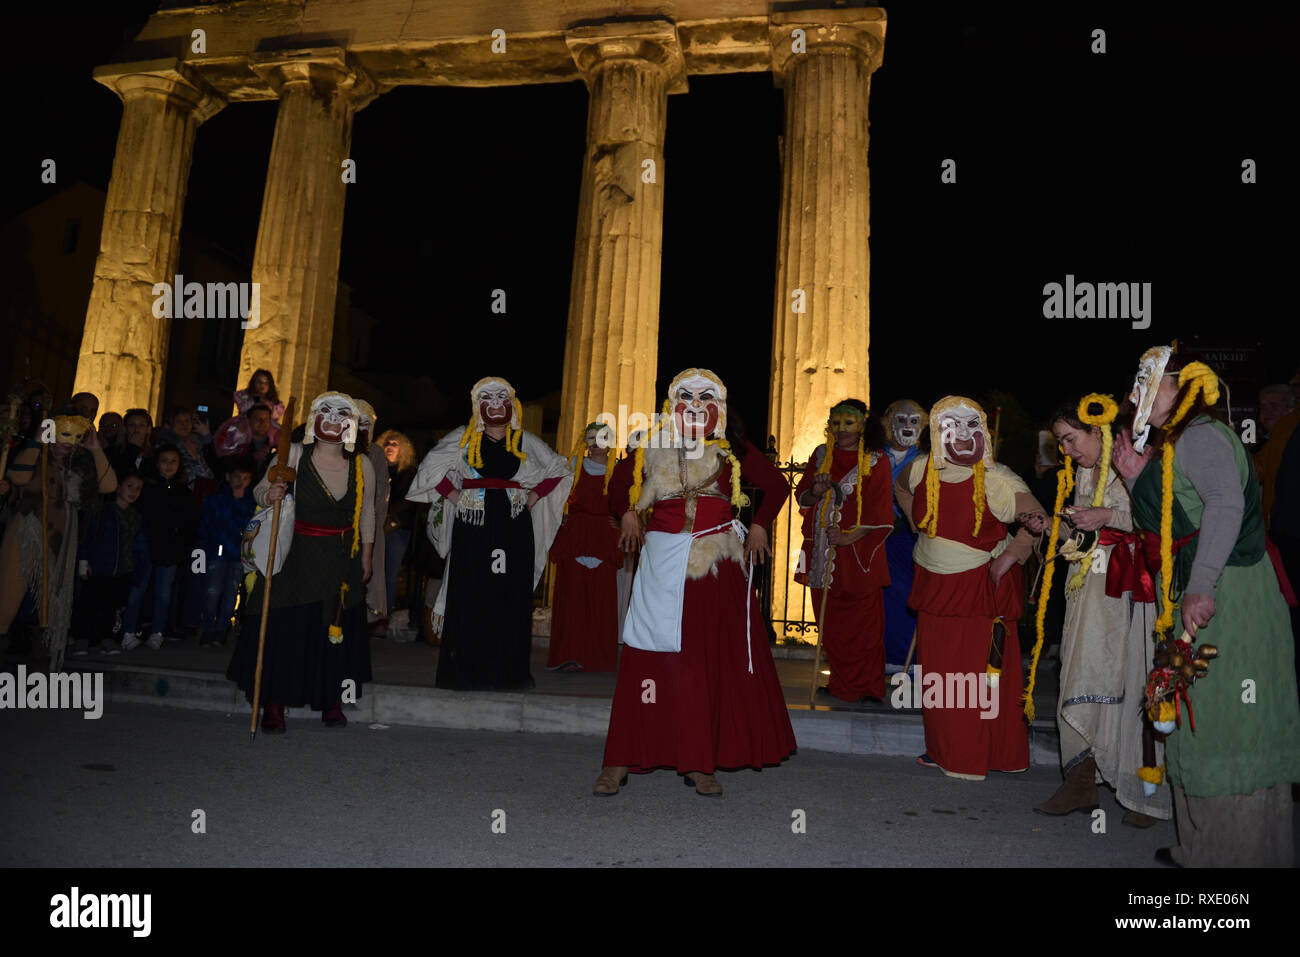 Athens, Greece. 9th Mar 2019. Participants march through the historic center of Athens to celebrate the ancient Greek festival phalliphoria honoring the god of wine, fertility and theater Dionysus in Athens, Greece. Credit: Nicolas Koutsokostas/Alamy Live News. Stock Photo